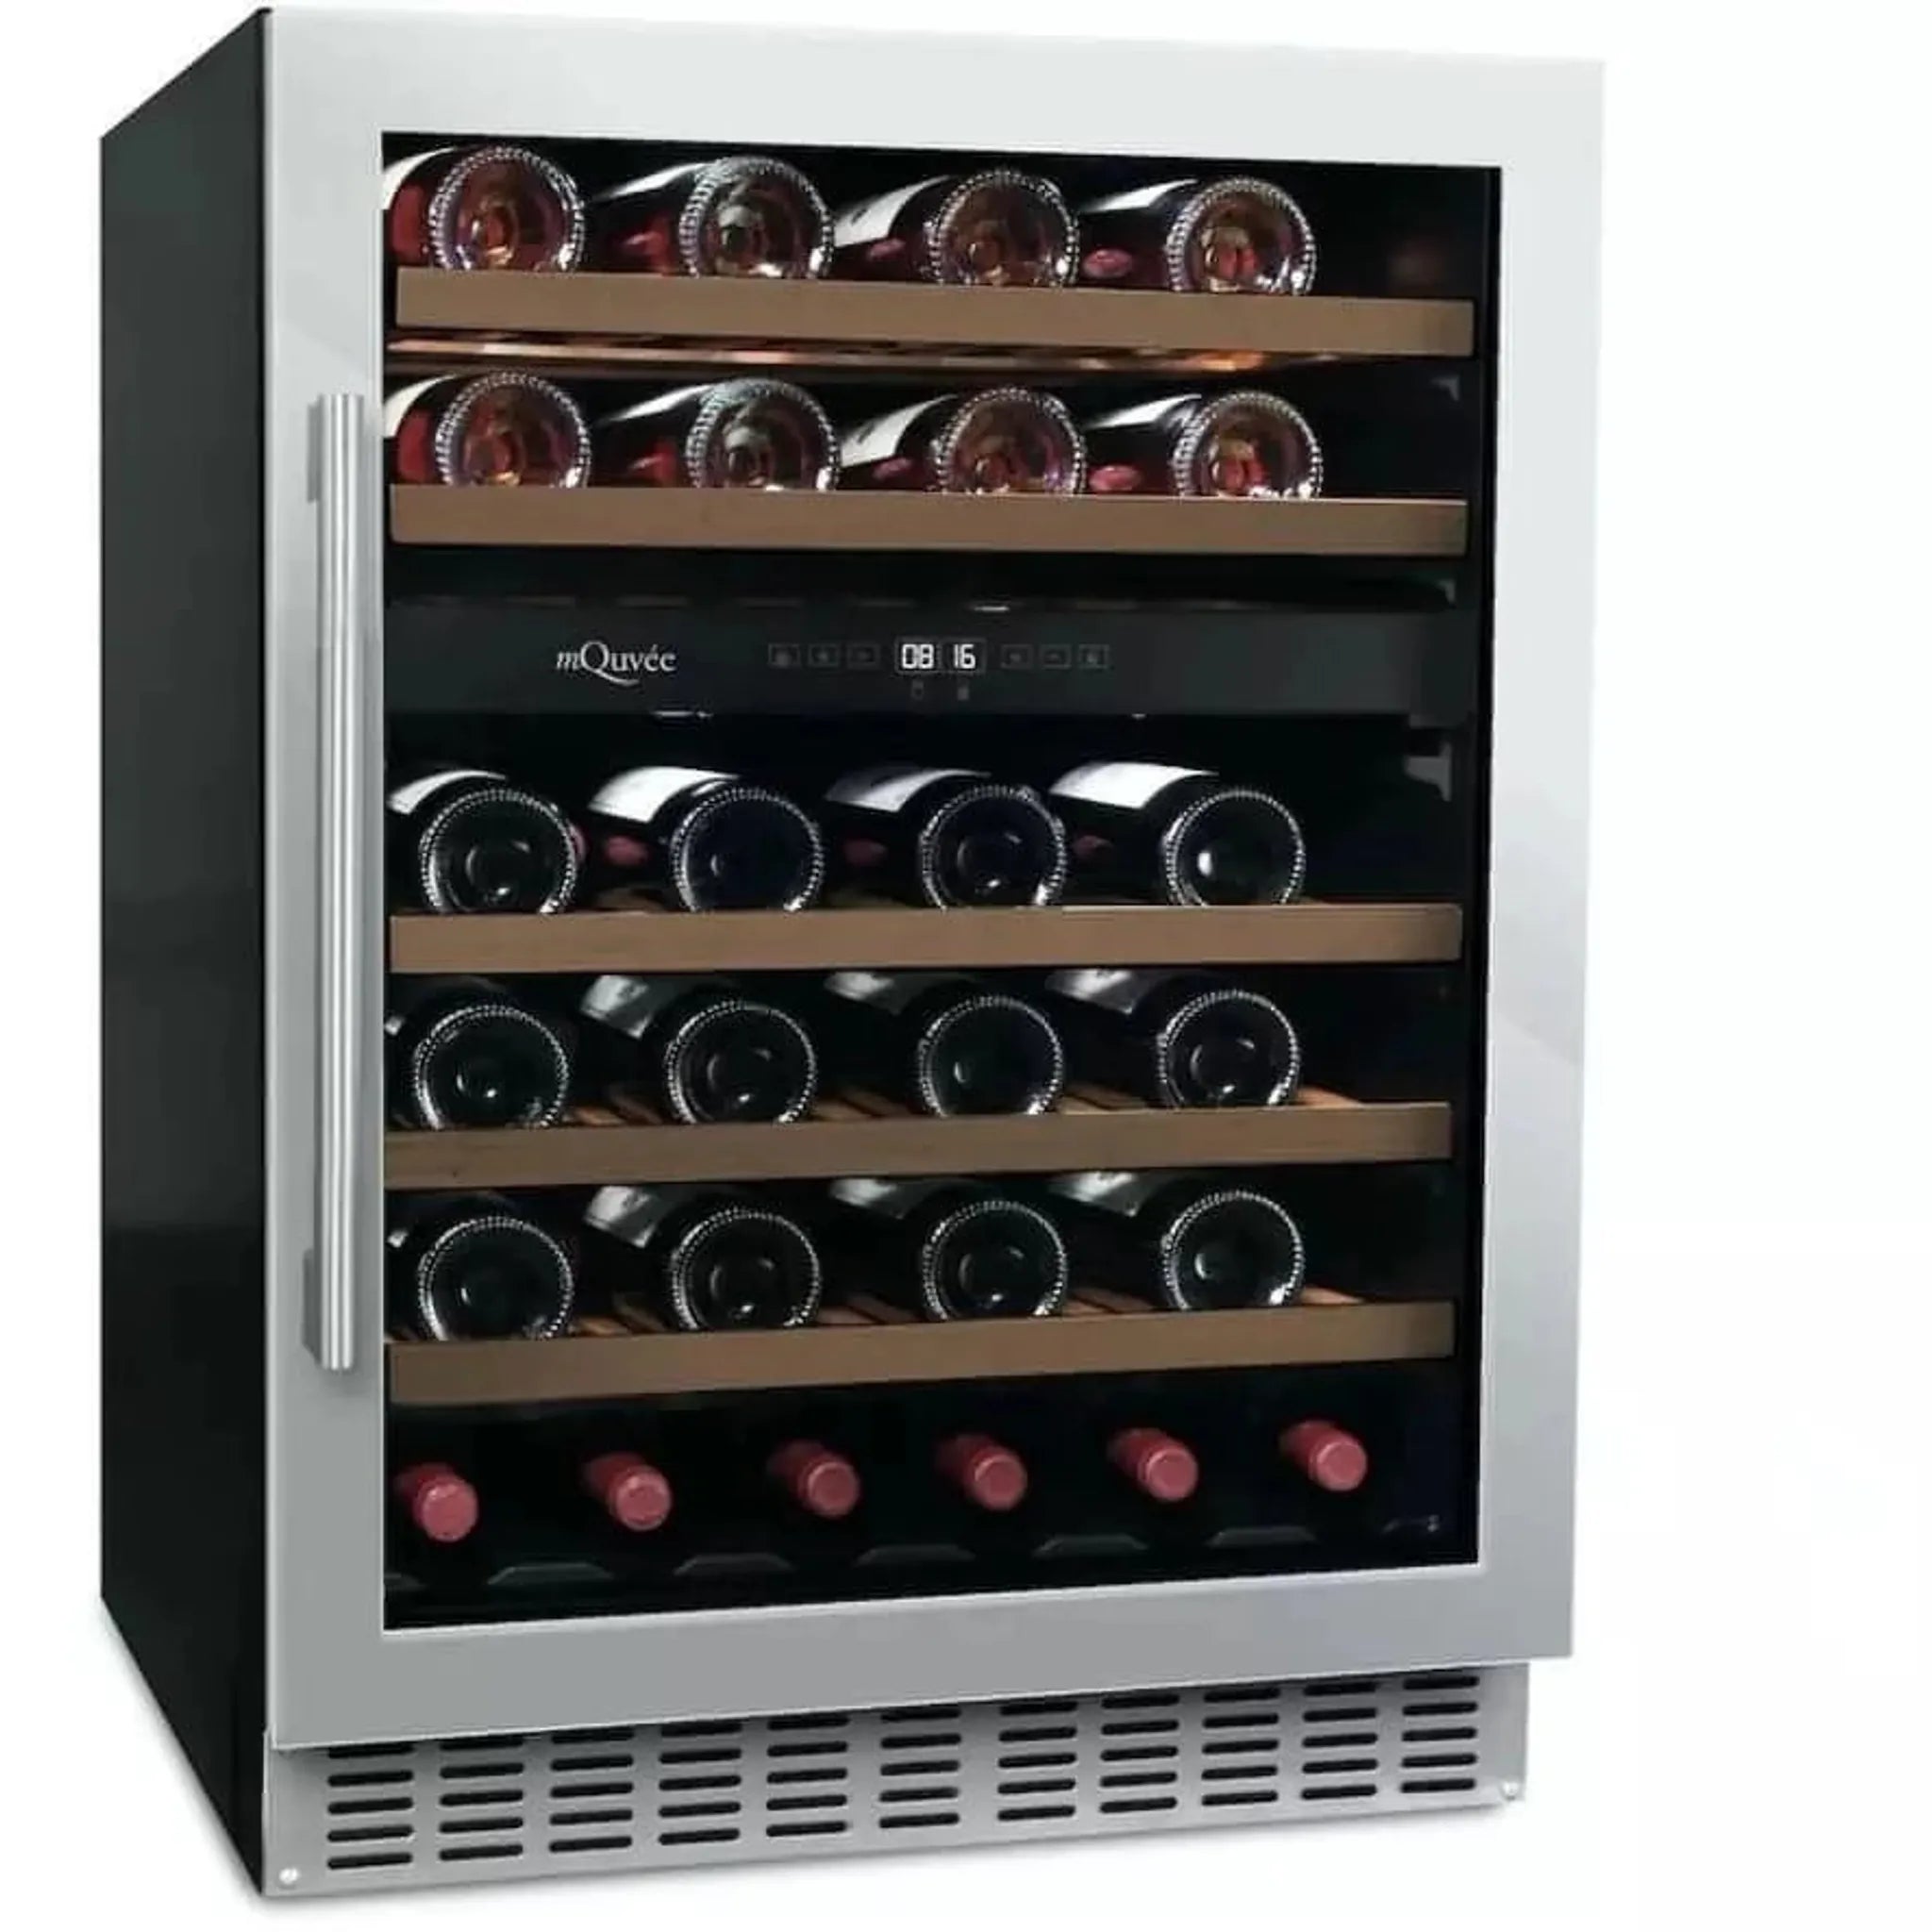 mQuvée - 600mm - Undercounter Wine Fridge - WineCave 720 60D Stainless